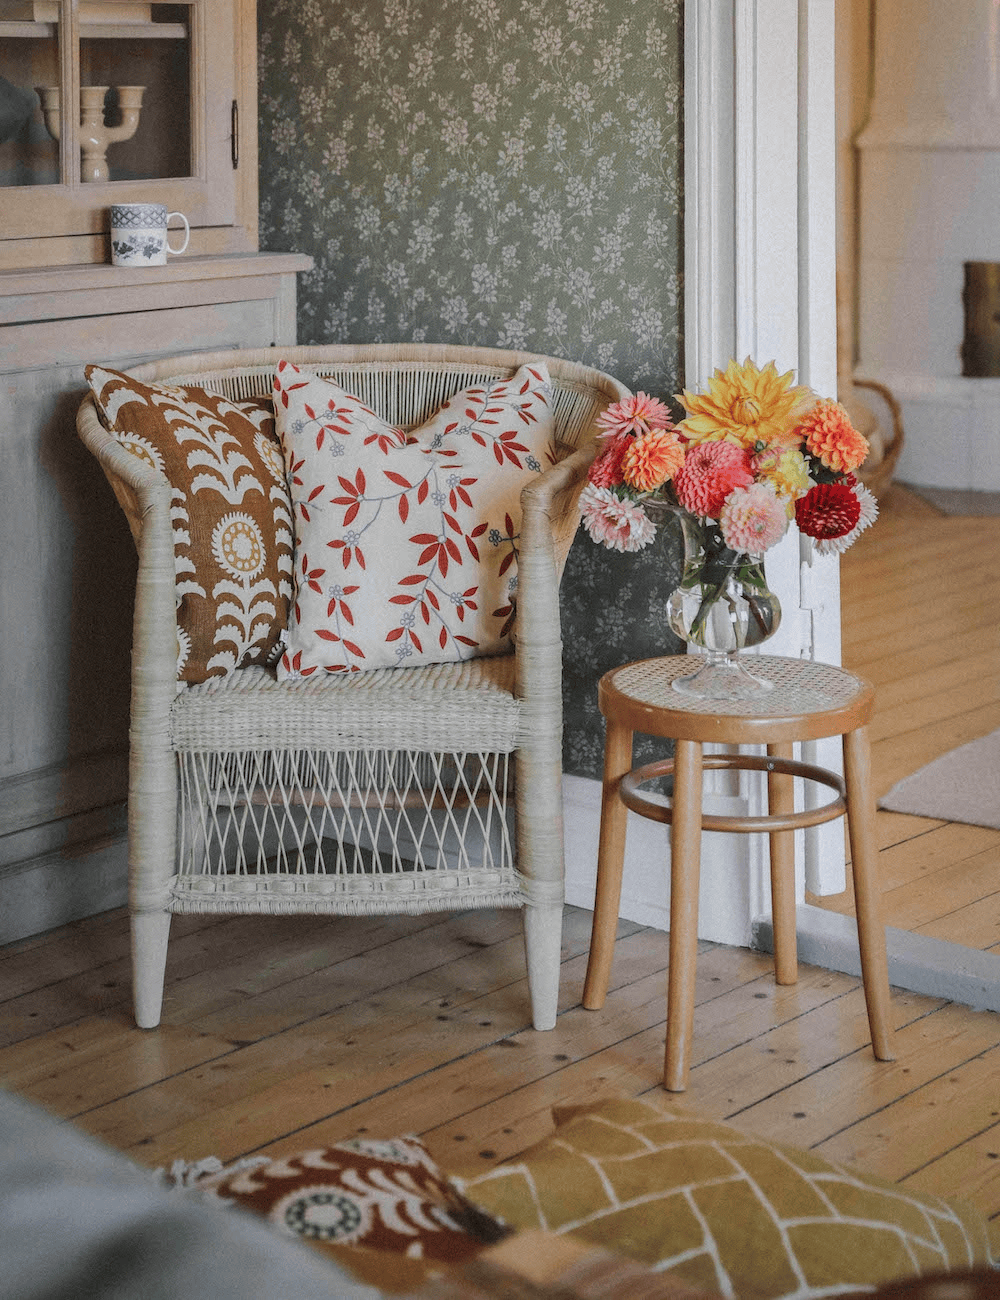 Throw pillows in a floral pattern for armchairs and stools